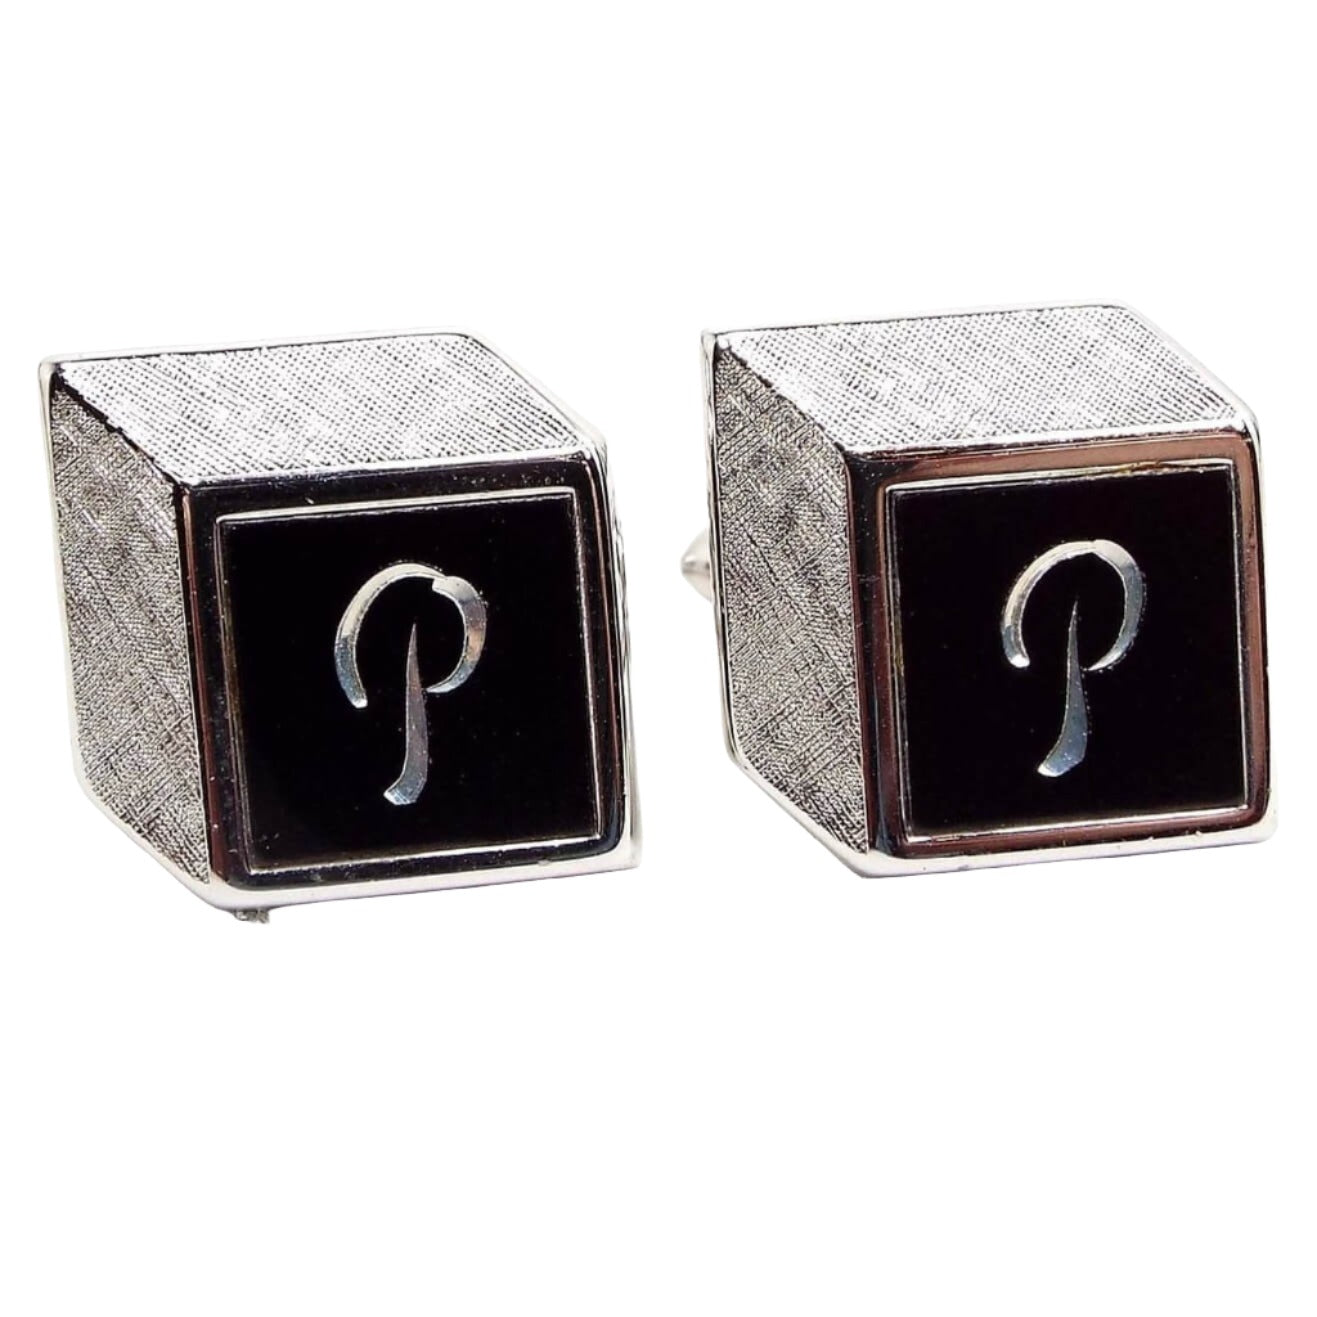 Front view of the retro vintage Swank initial cufflinks. They are silver tone in color with black painted fronts that have the letter P engraved on them. The design is meant to make them look like 3D cubes from the front though they are flat. The top and side angled edge are textured silver tone in color.